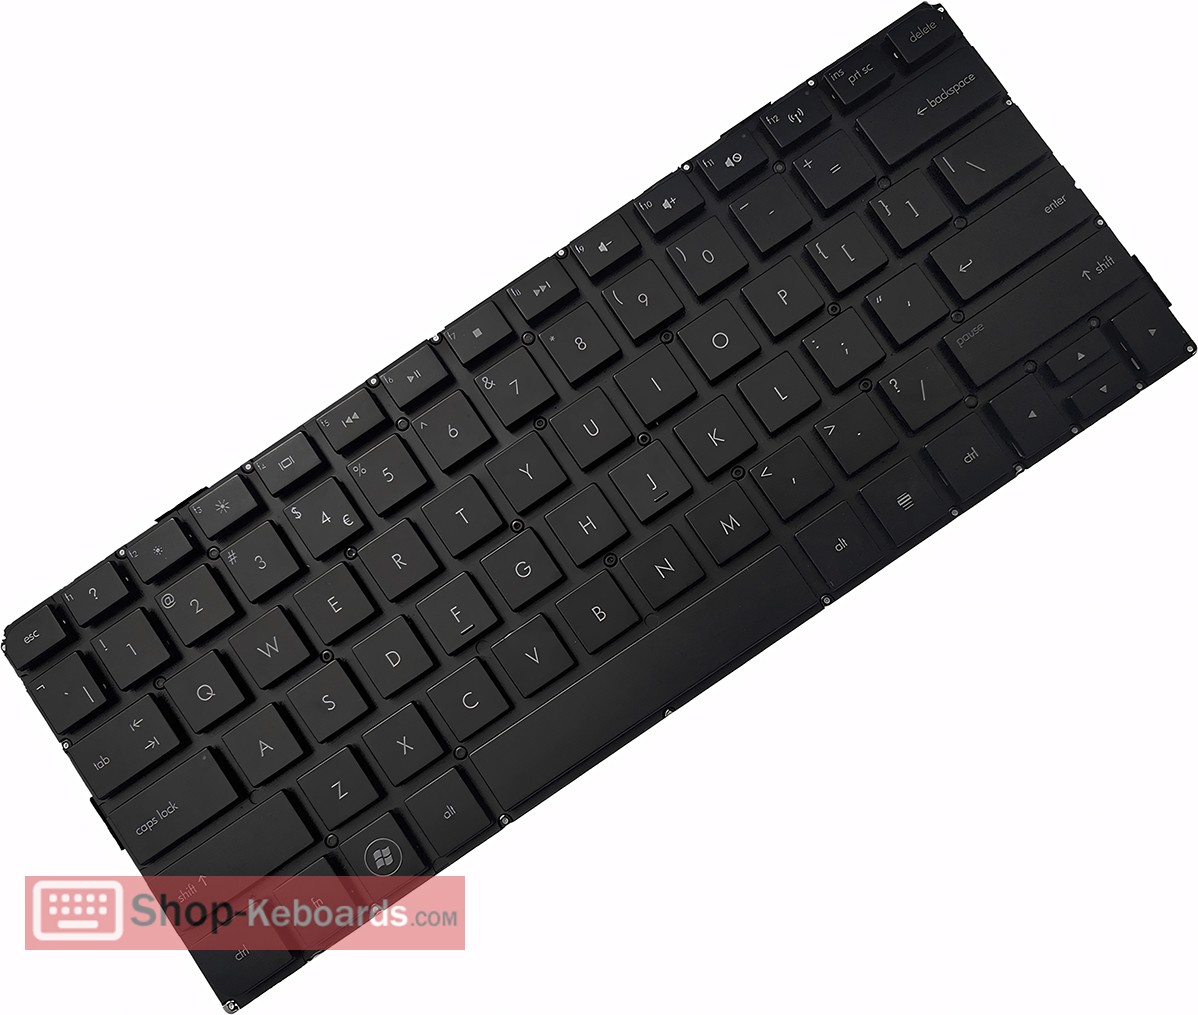 HP ENVY 13-1190 SERIES Keyboard replacement